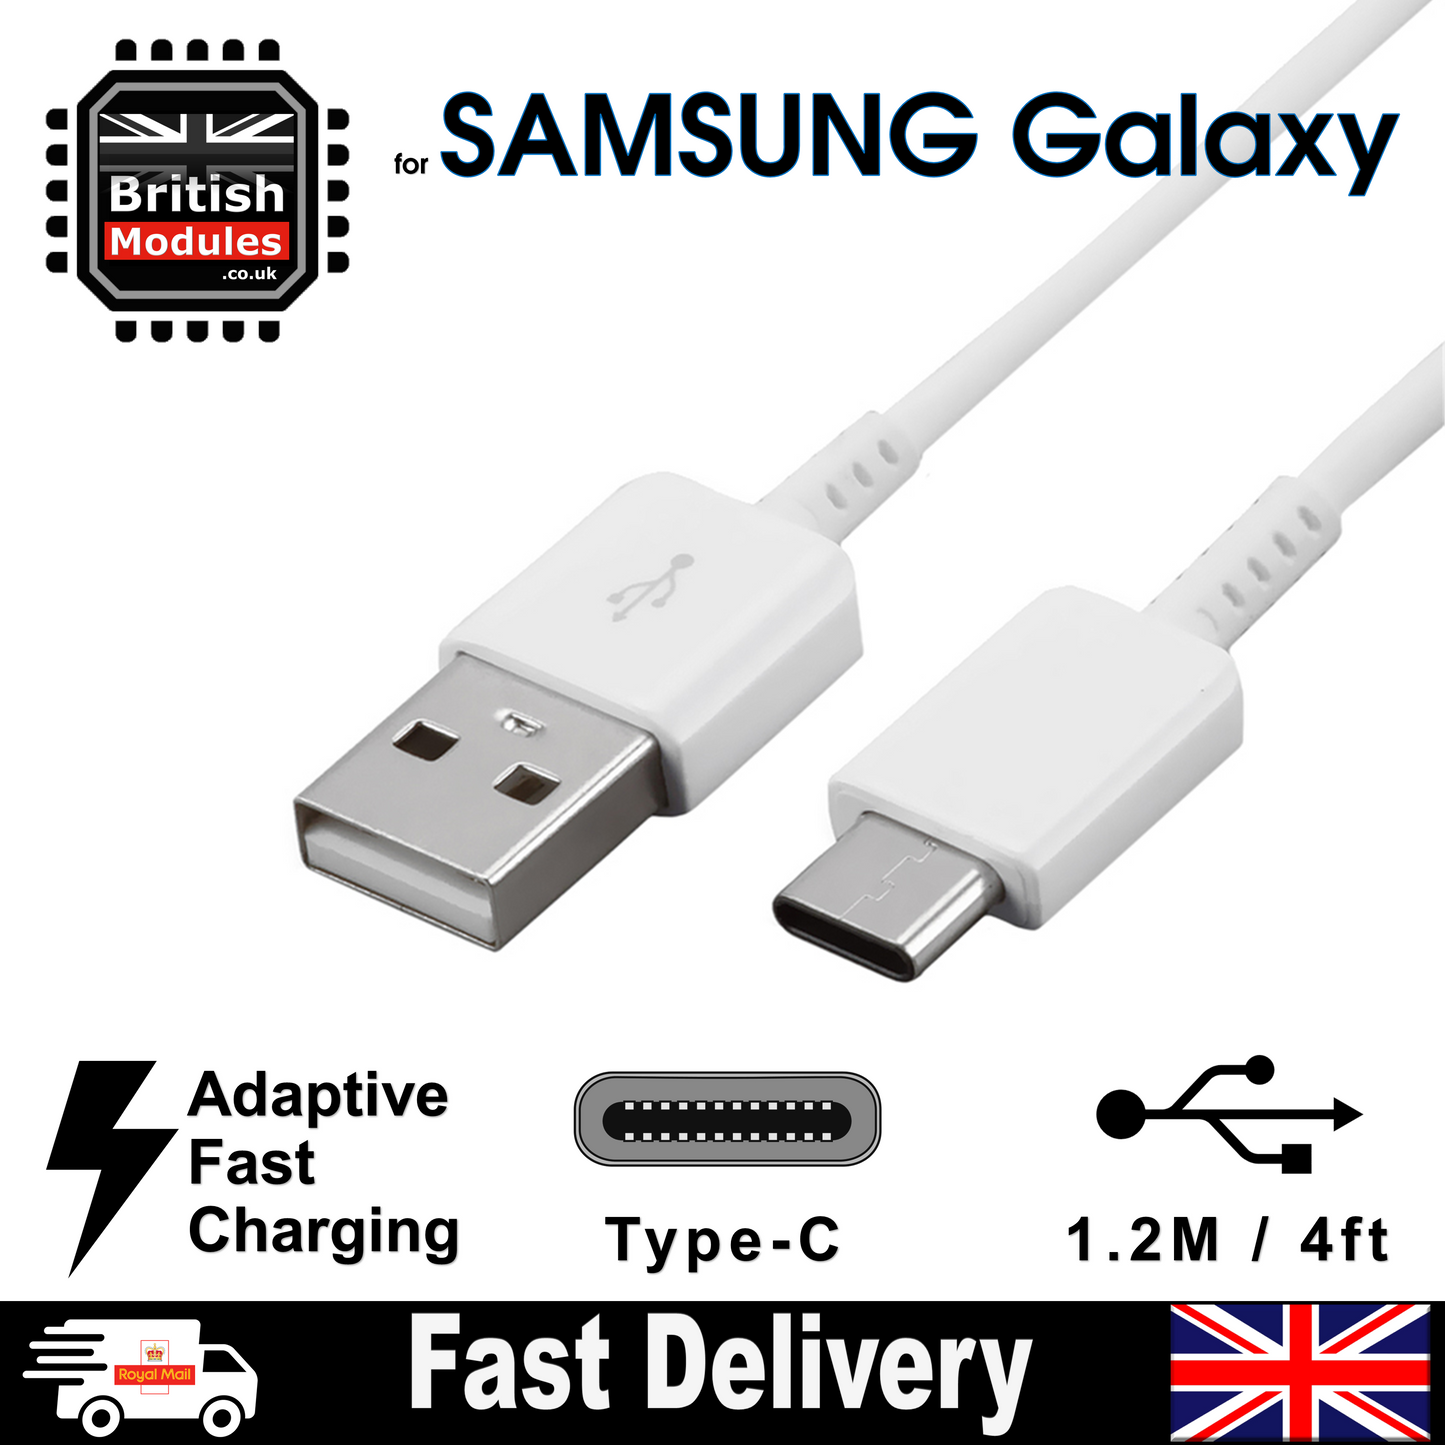 Samsung, EP-DN930CWE, Charger Cable / Data Cable, USB to USB Type C, 1.2M, White